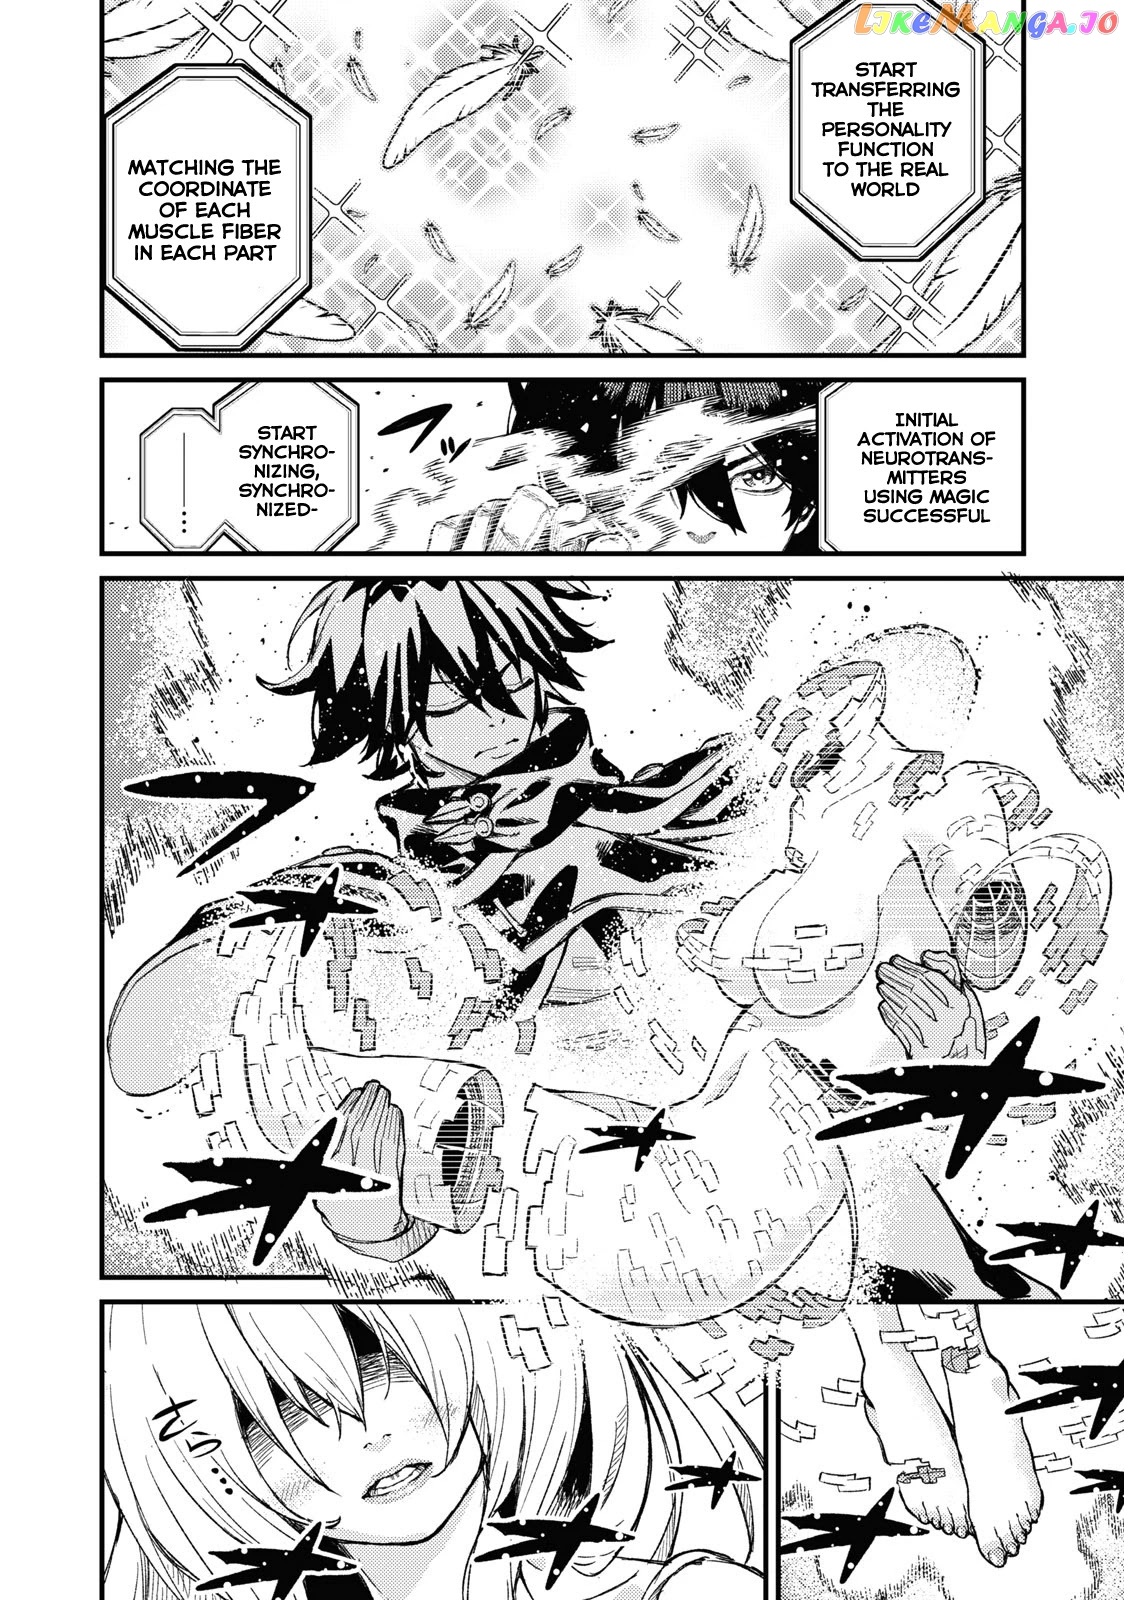 Skill Lender’s retrieving (Tale) ~I told you it’s 10% per 10 days at first, didn’t I~ chapter 3 - page 7